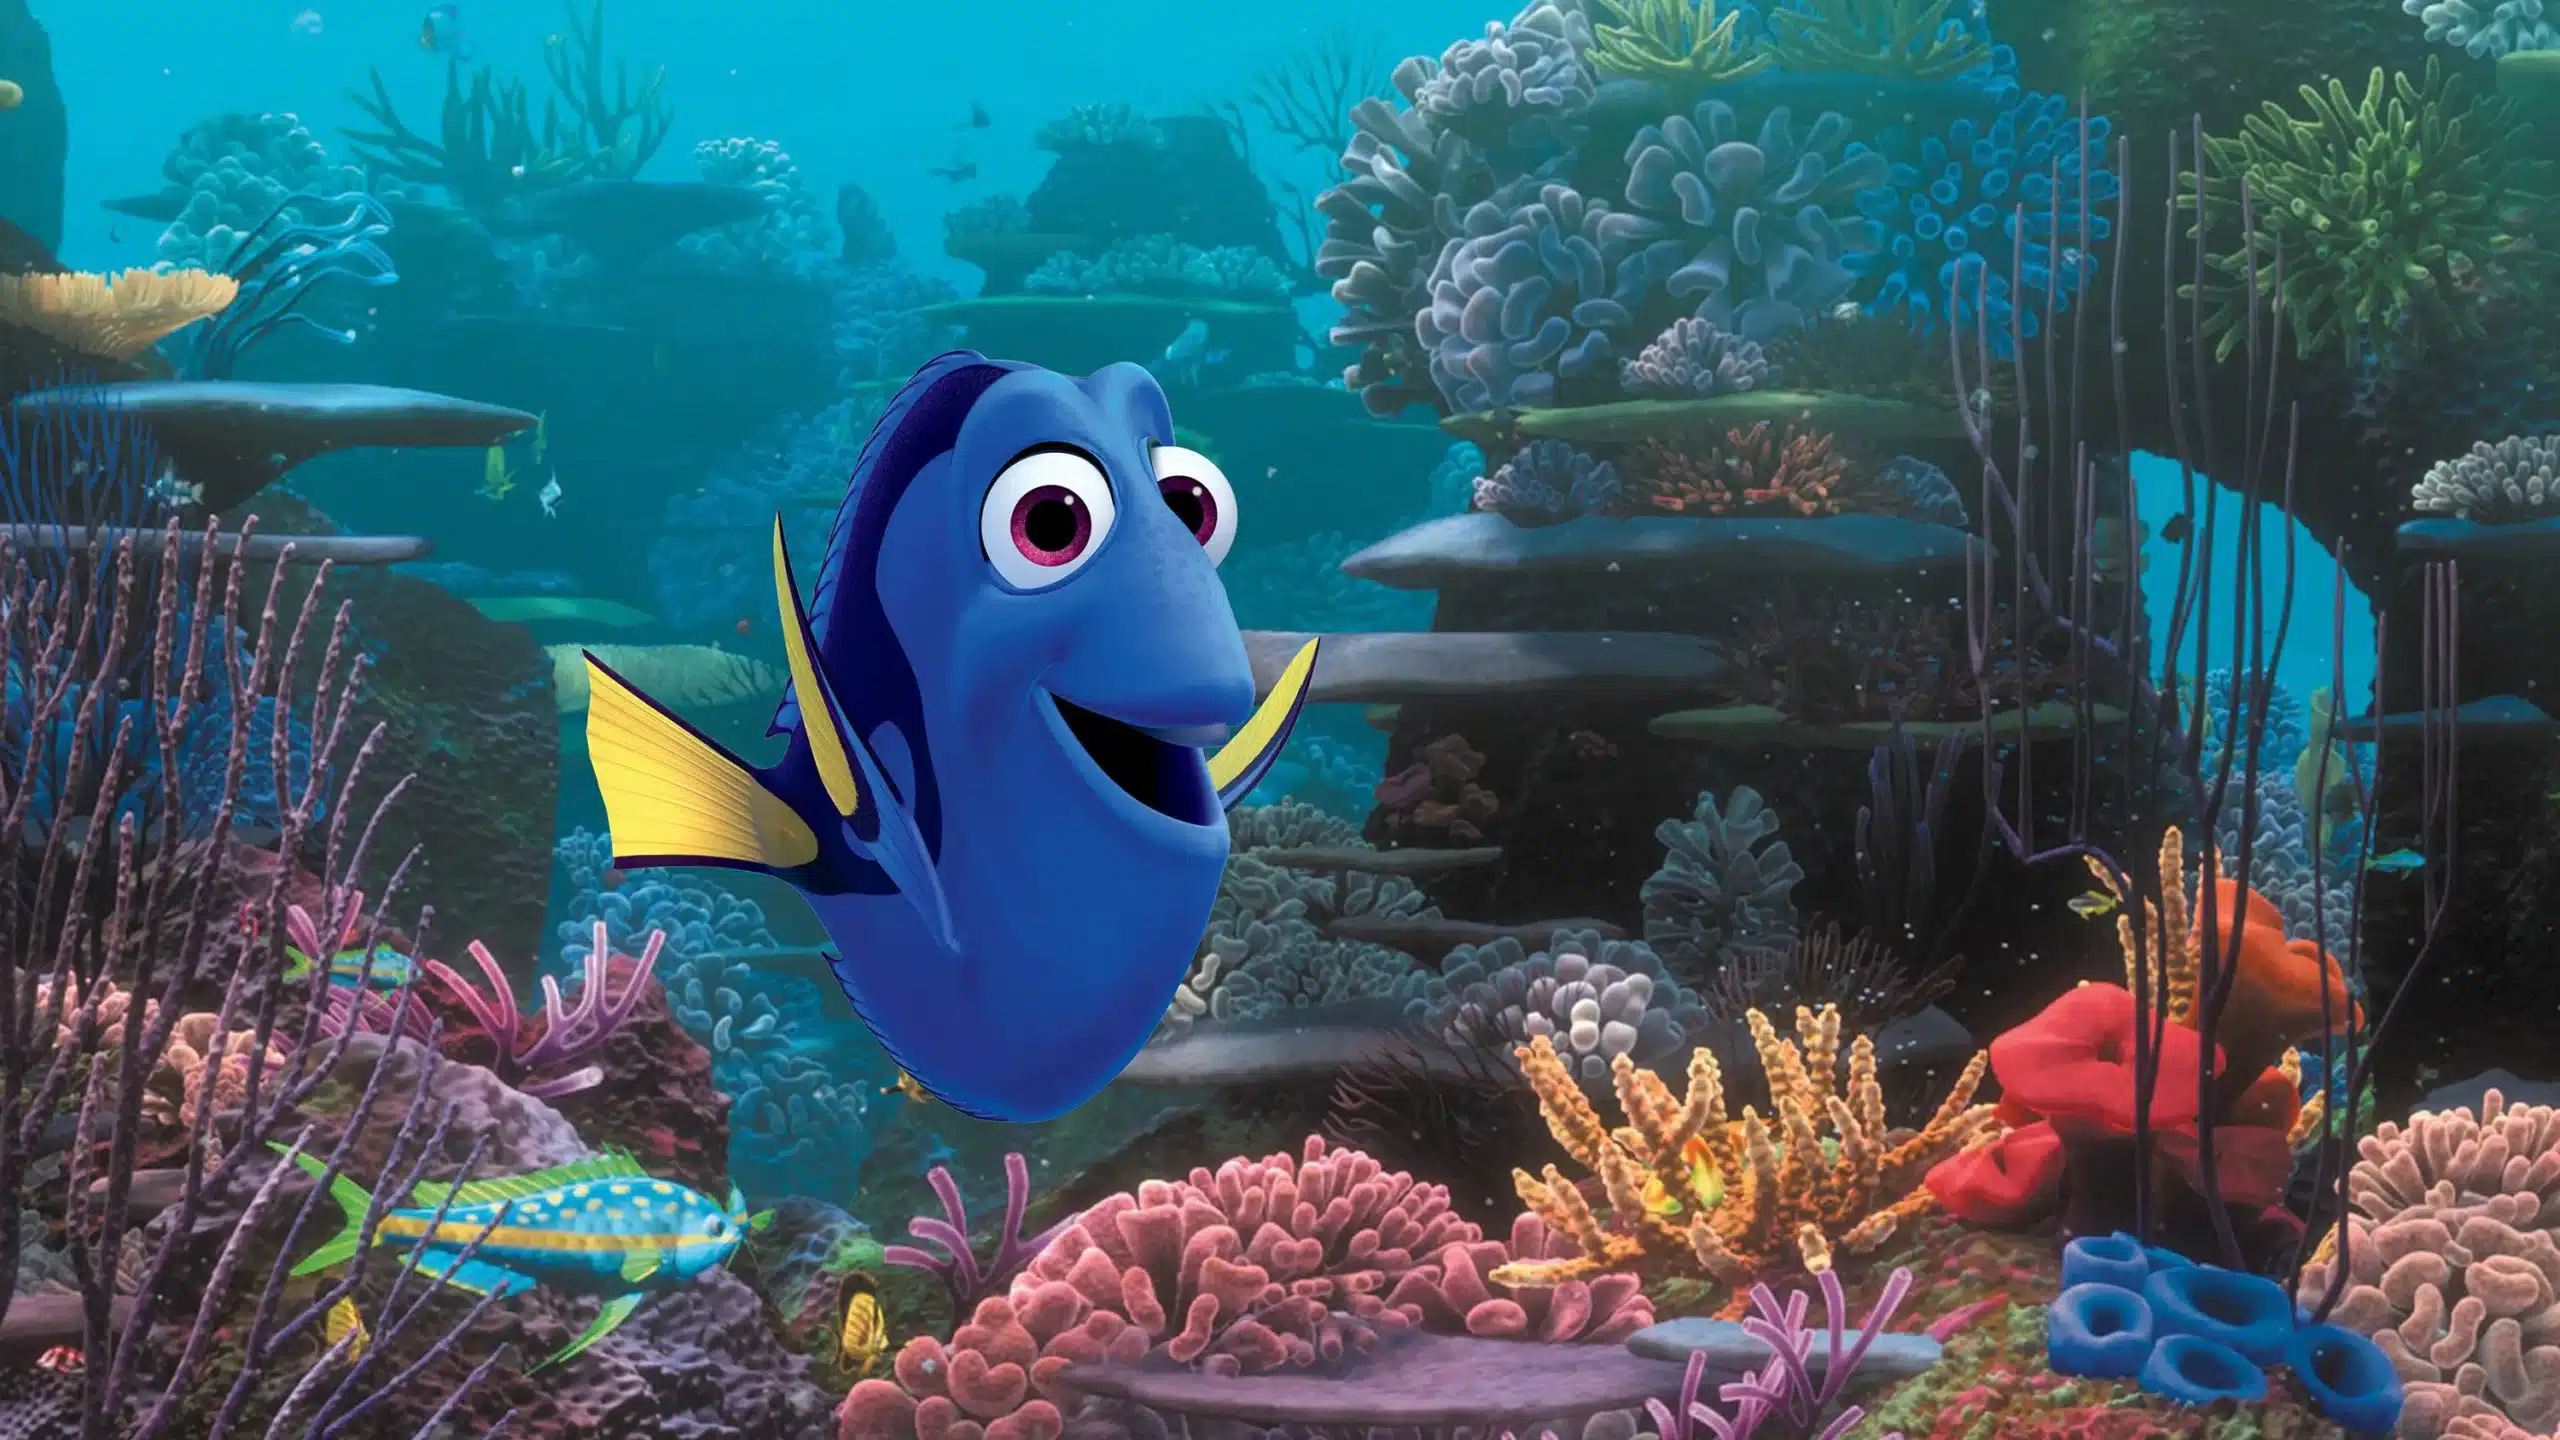 12 Noteworthy Quotes From ‘Finding Nemo’